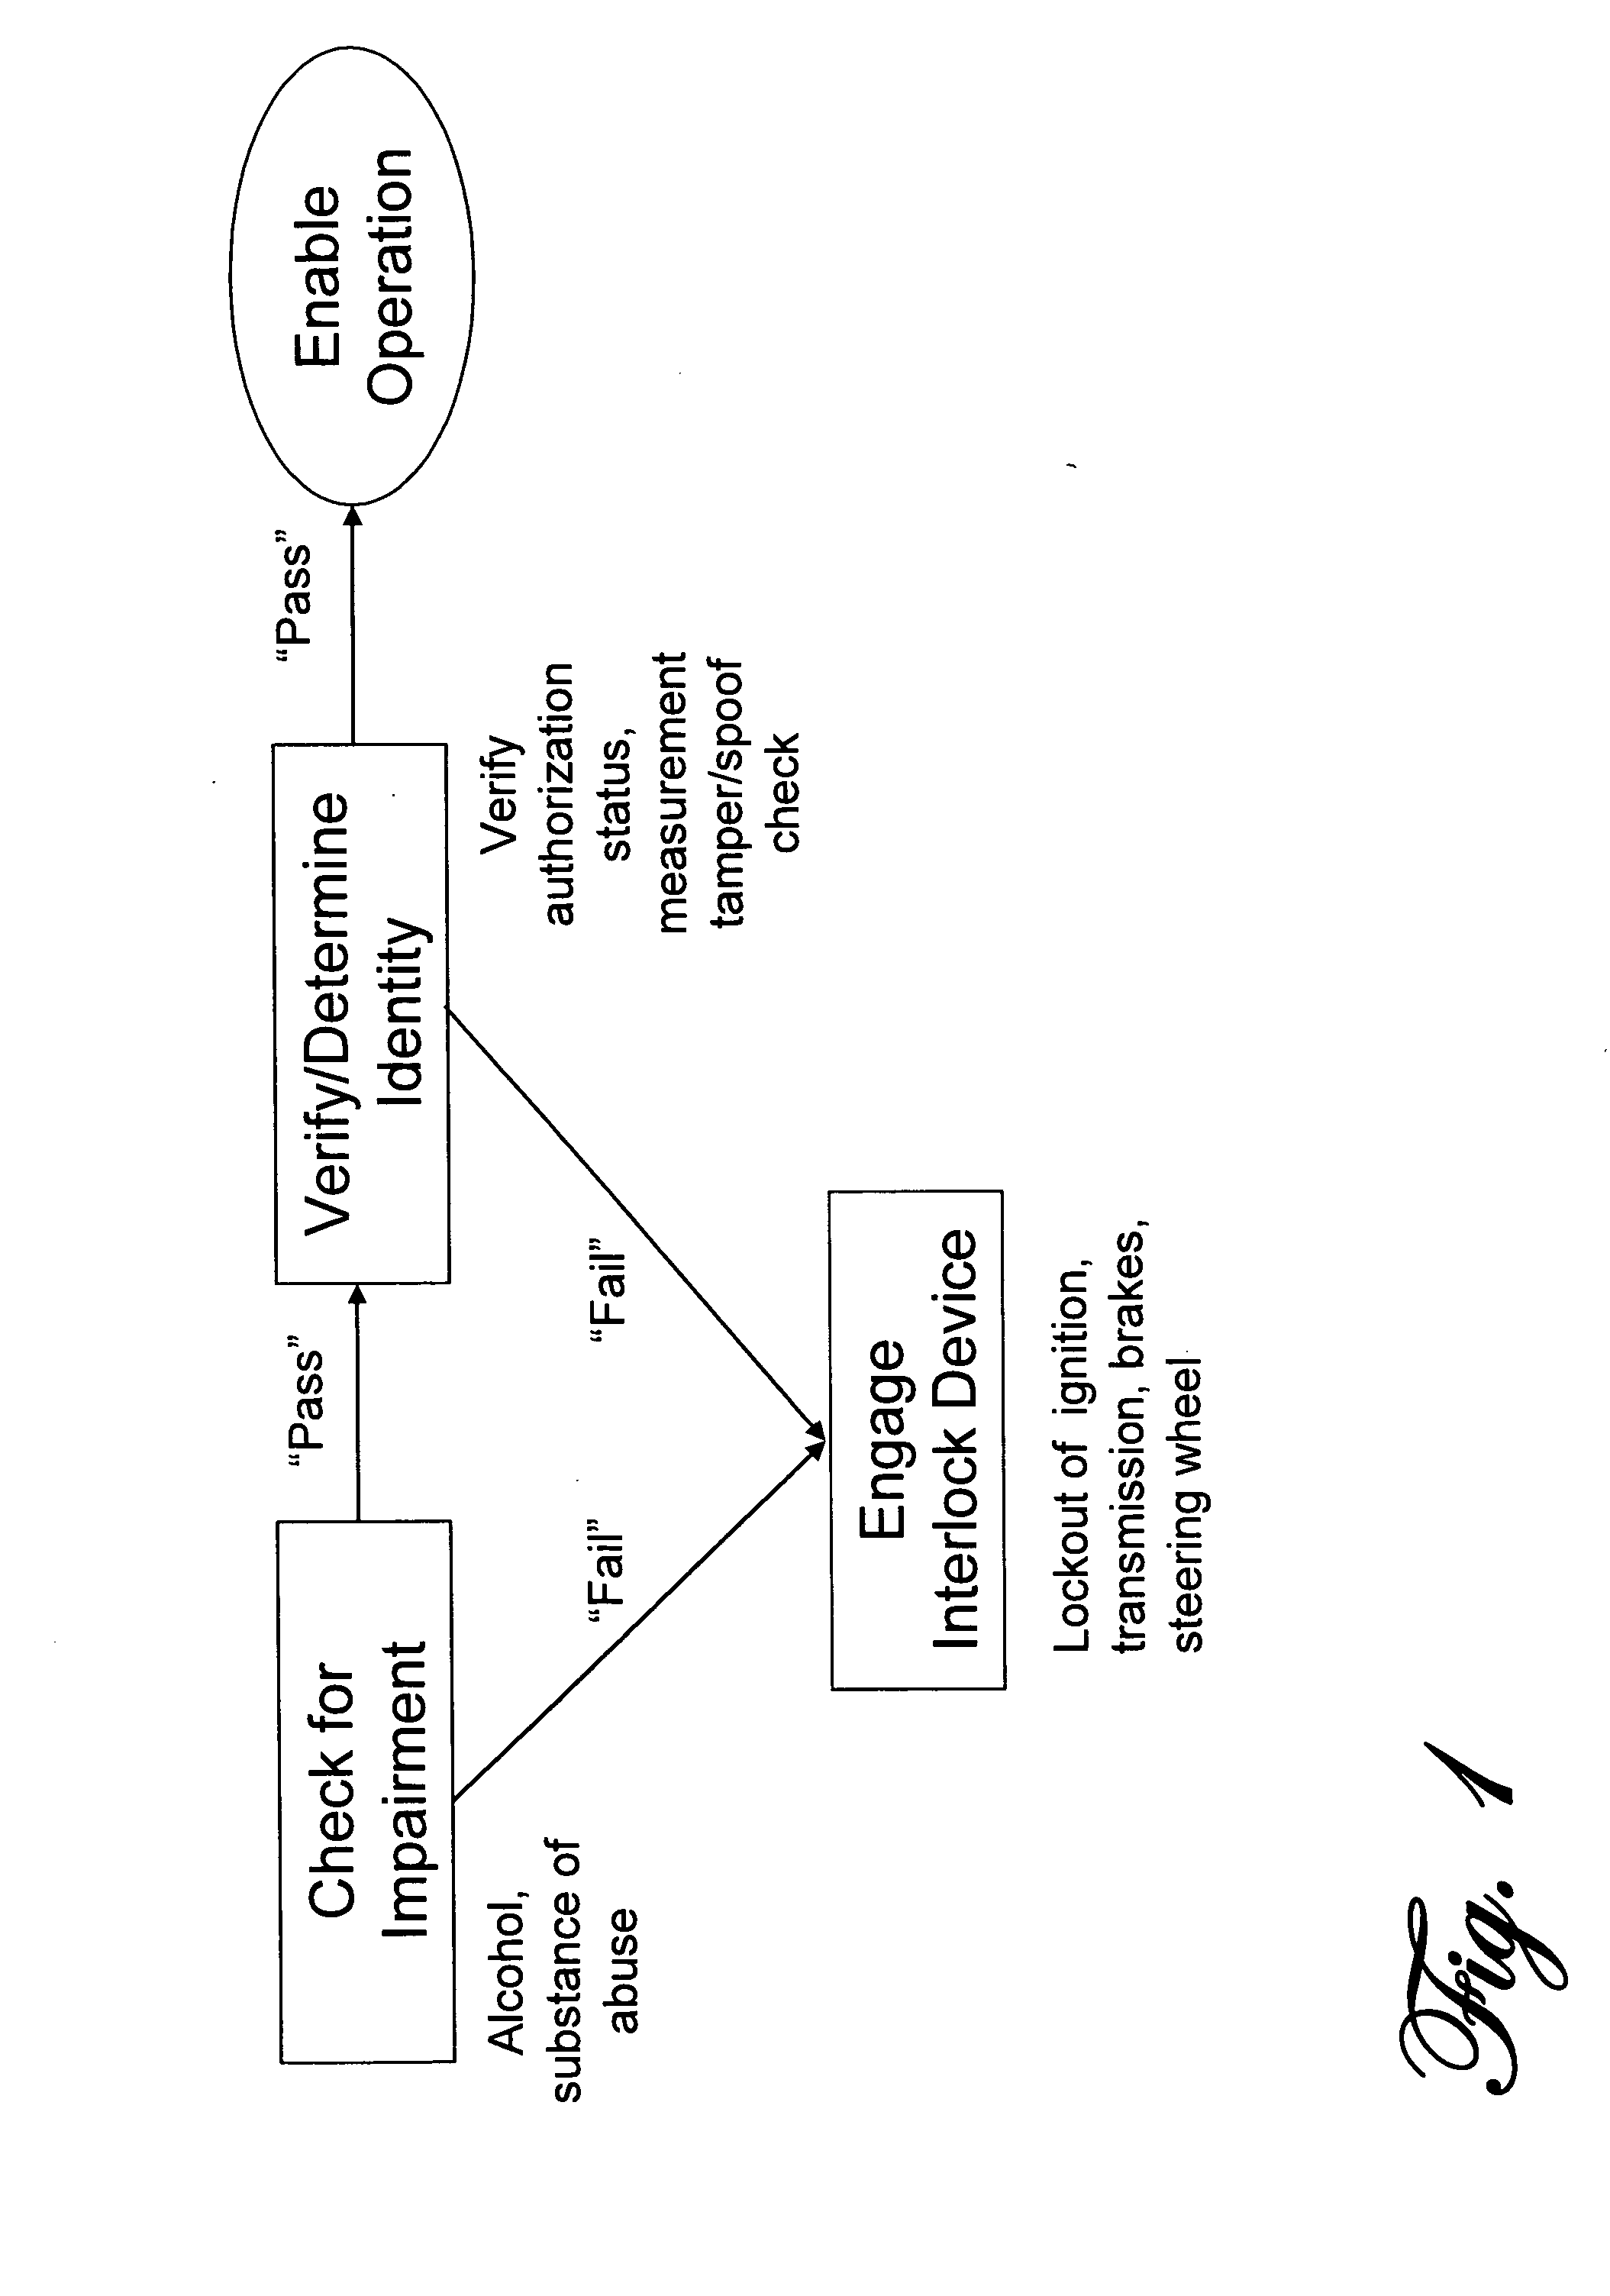 Apparatus and method for controlling operation of vehicles or machinery by intoxicated or impaired individuals